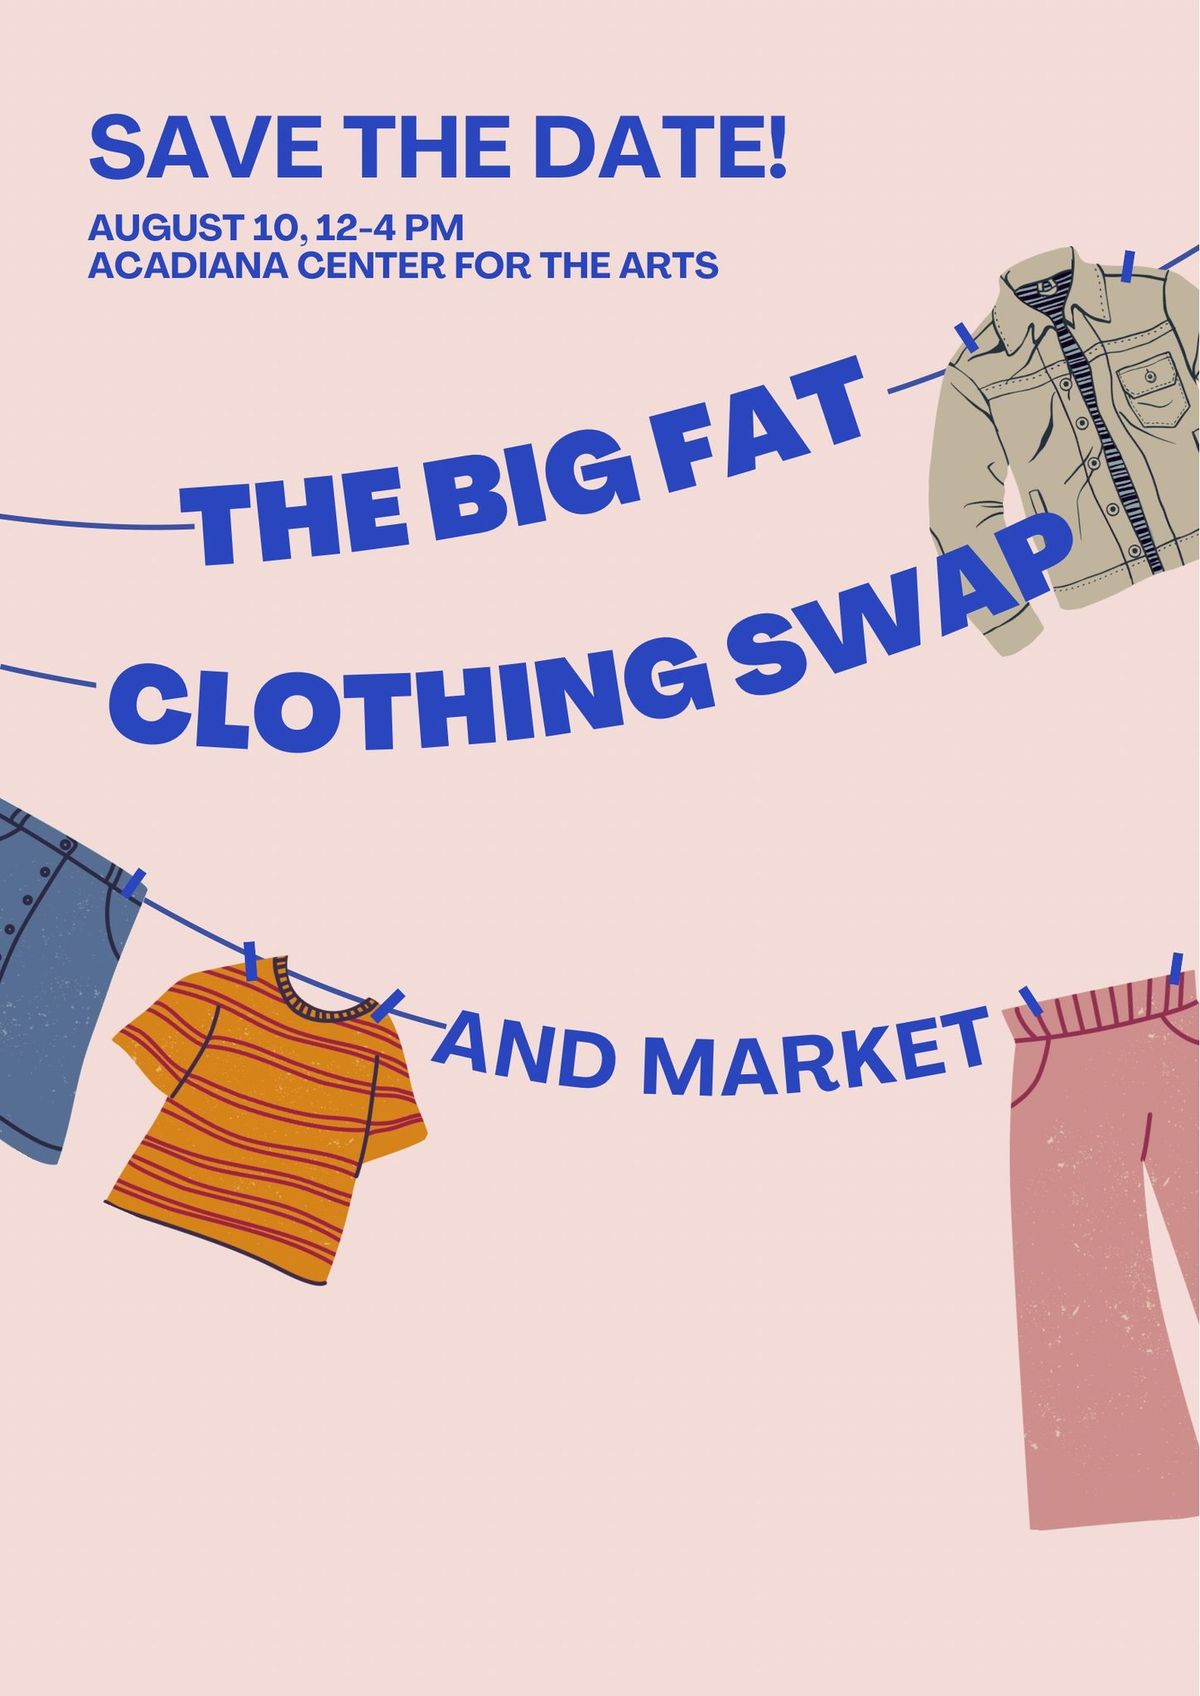 The Big Fat Clothing Swap and Market